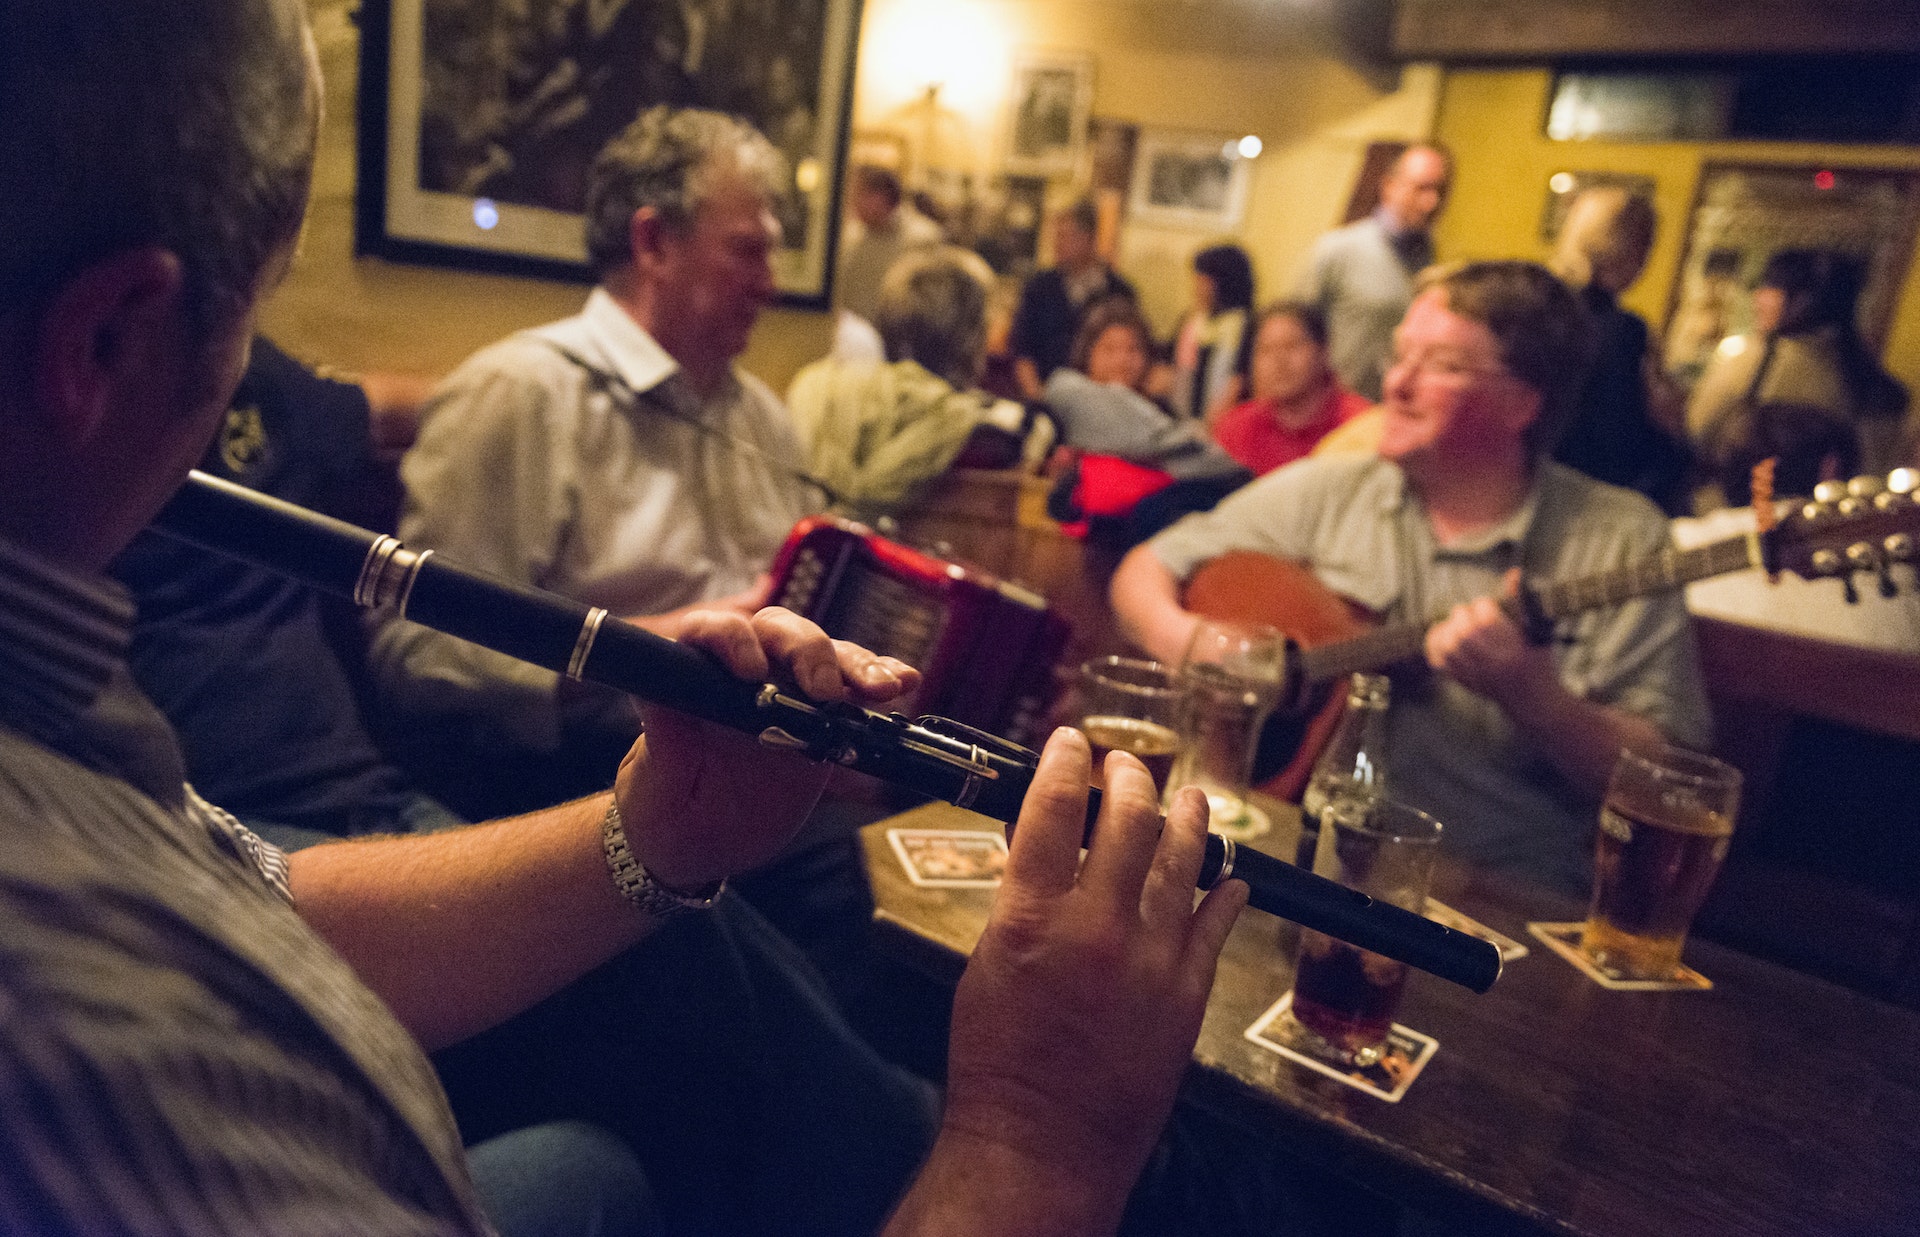 O'Connor's Pub, group playing music at a table